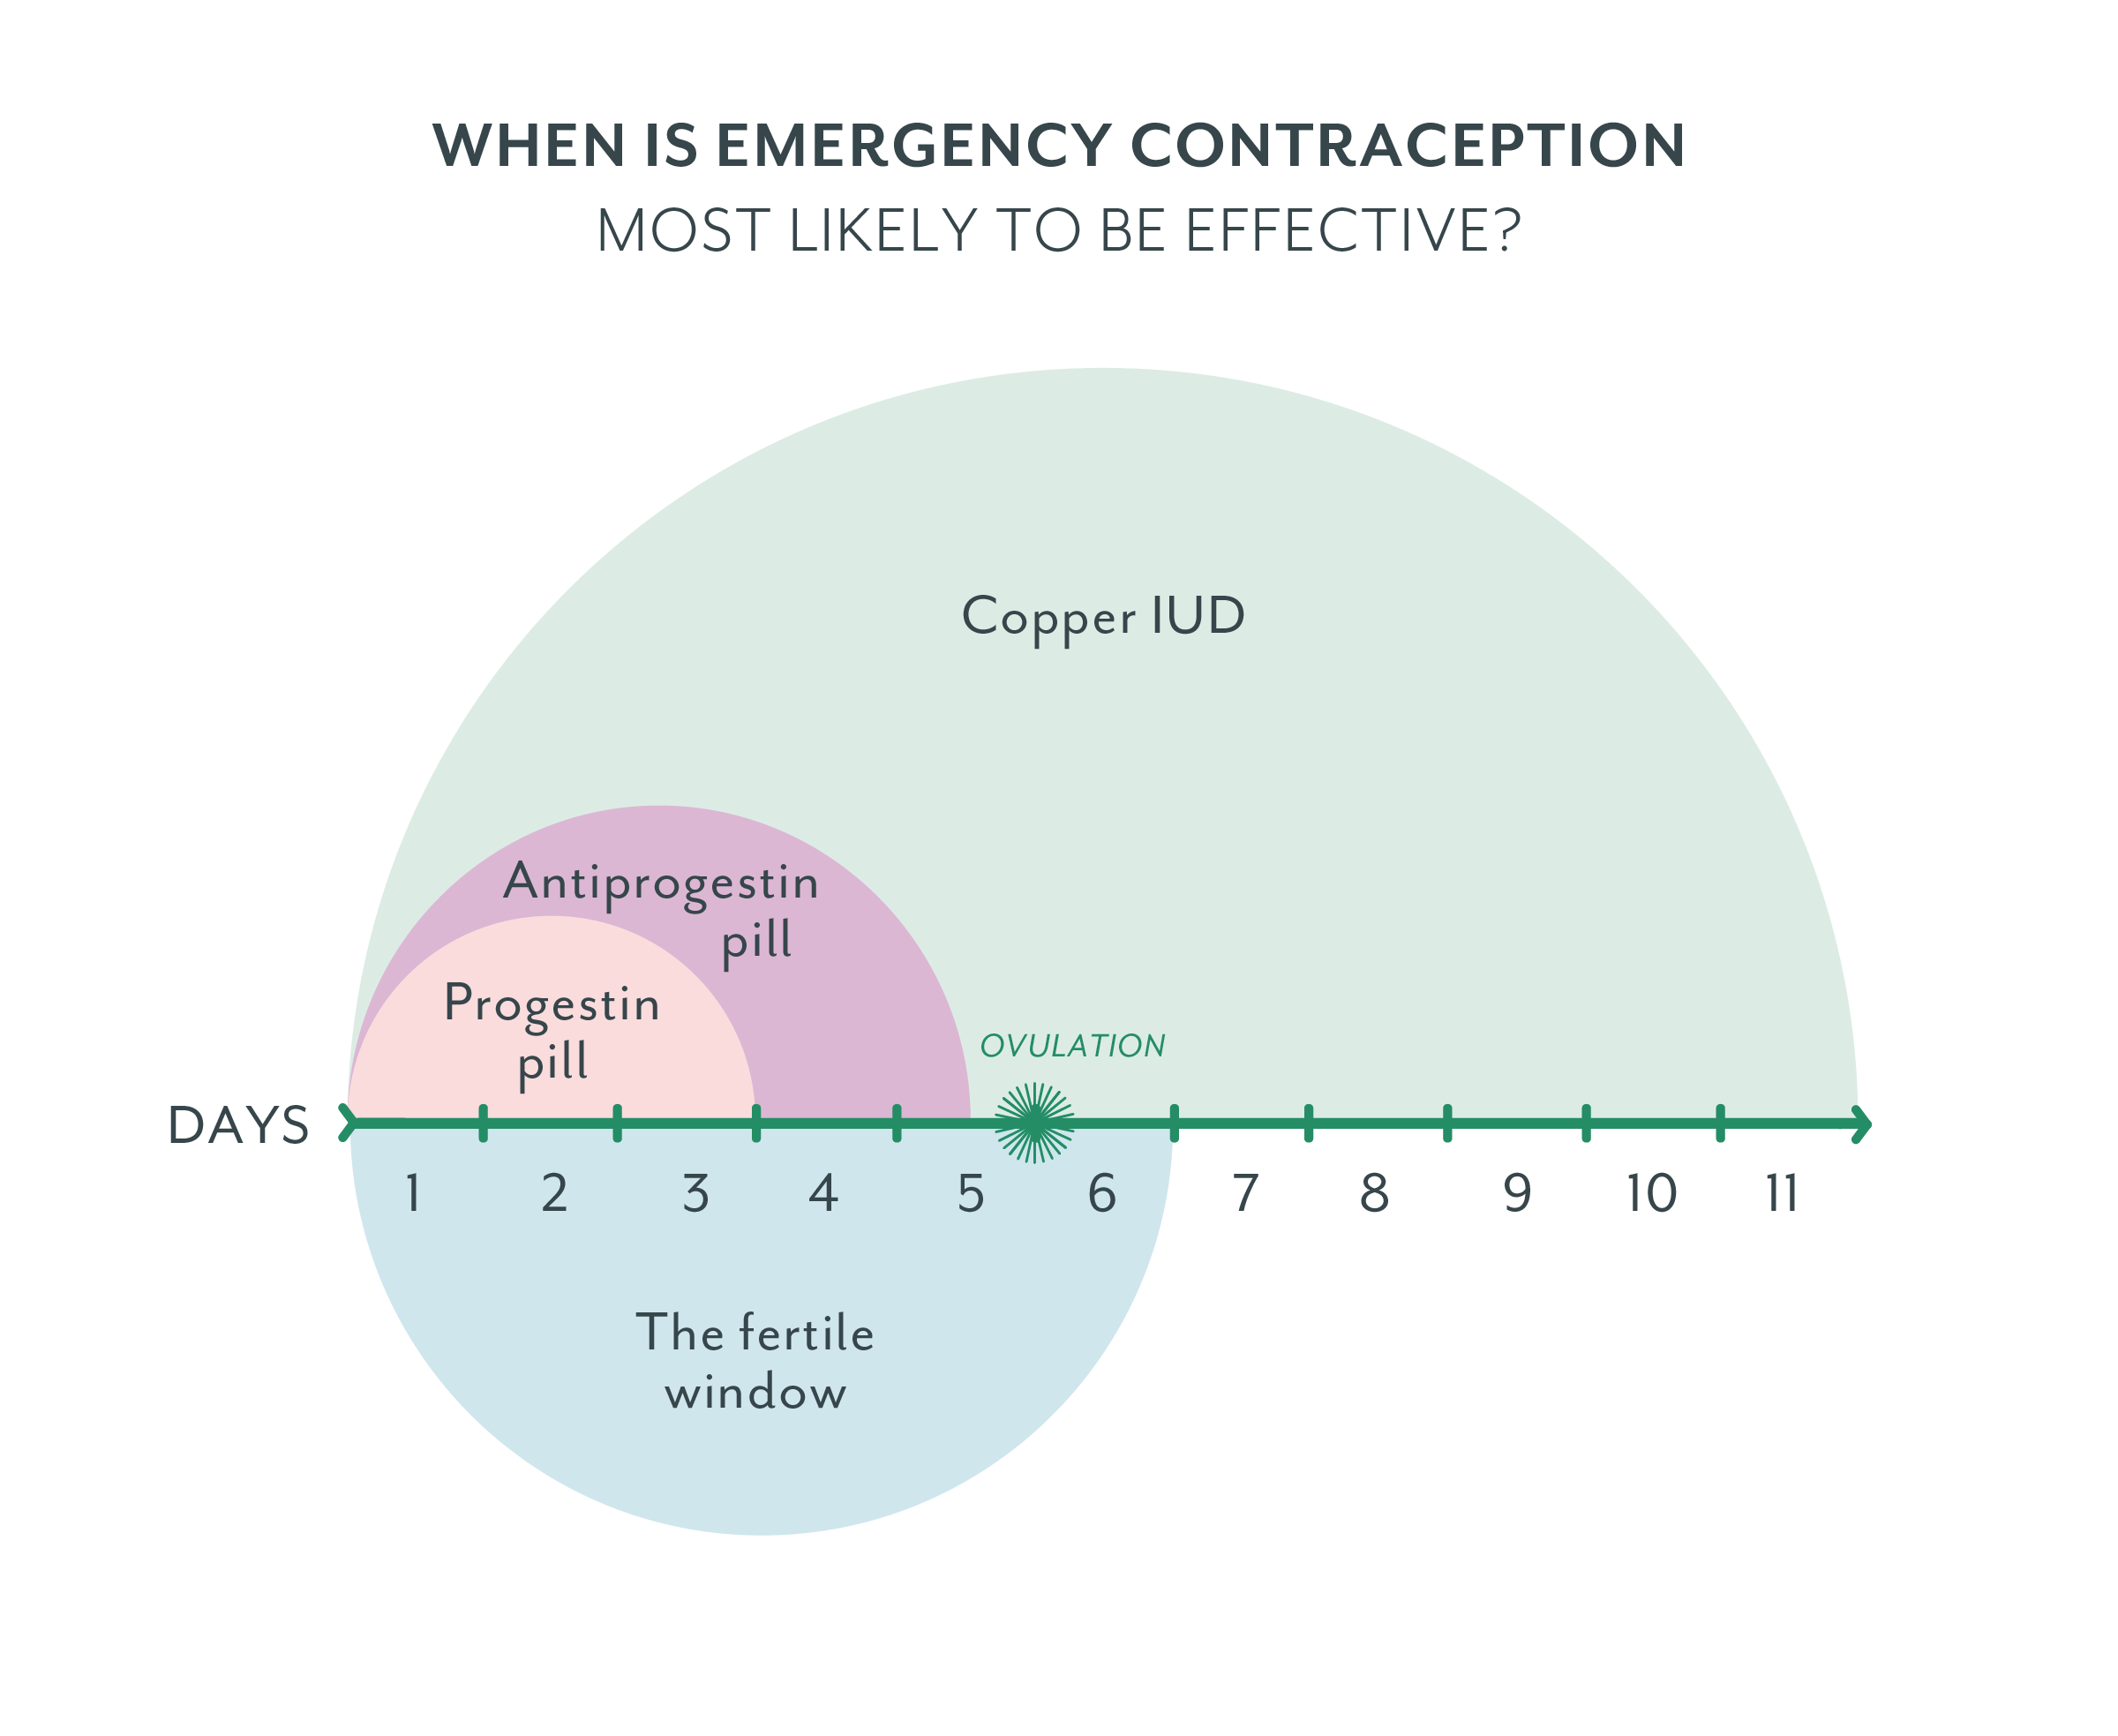 Emergency contraception: When its most effective